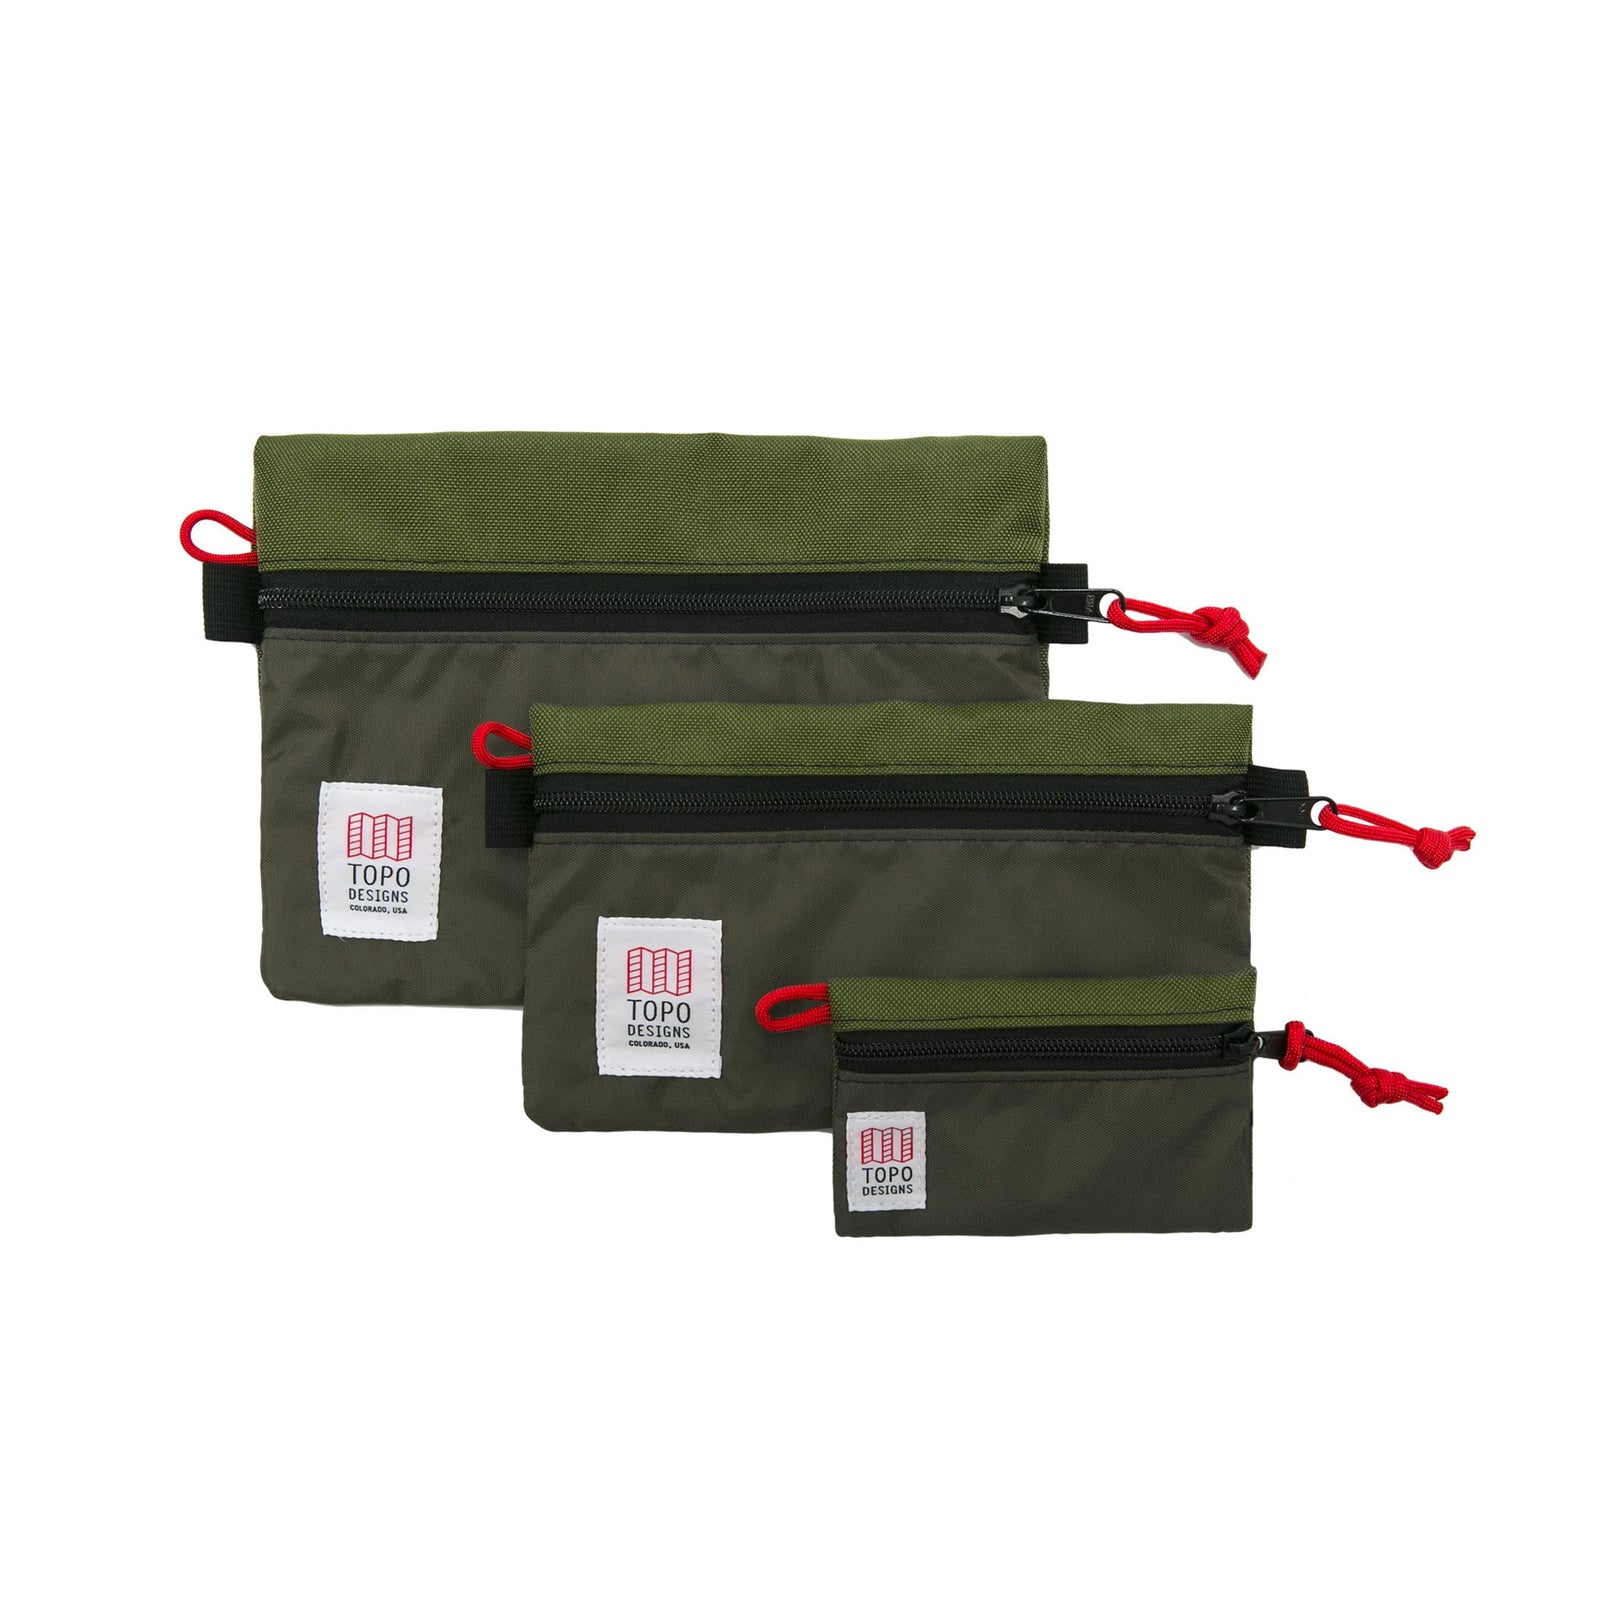 Topo Designs Accessory Bags - product shot of the "Medium", "Small", and "Micro" accessory bags in "Olive - Recycled" "Olive".